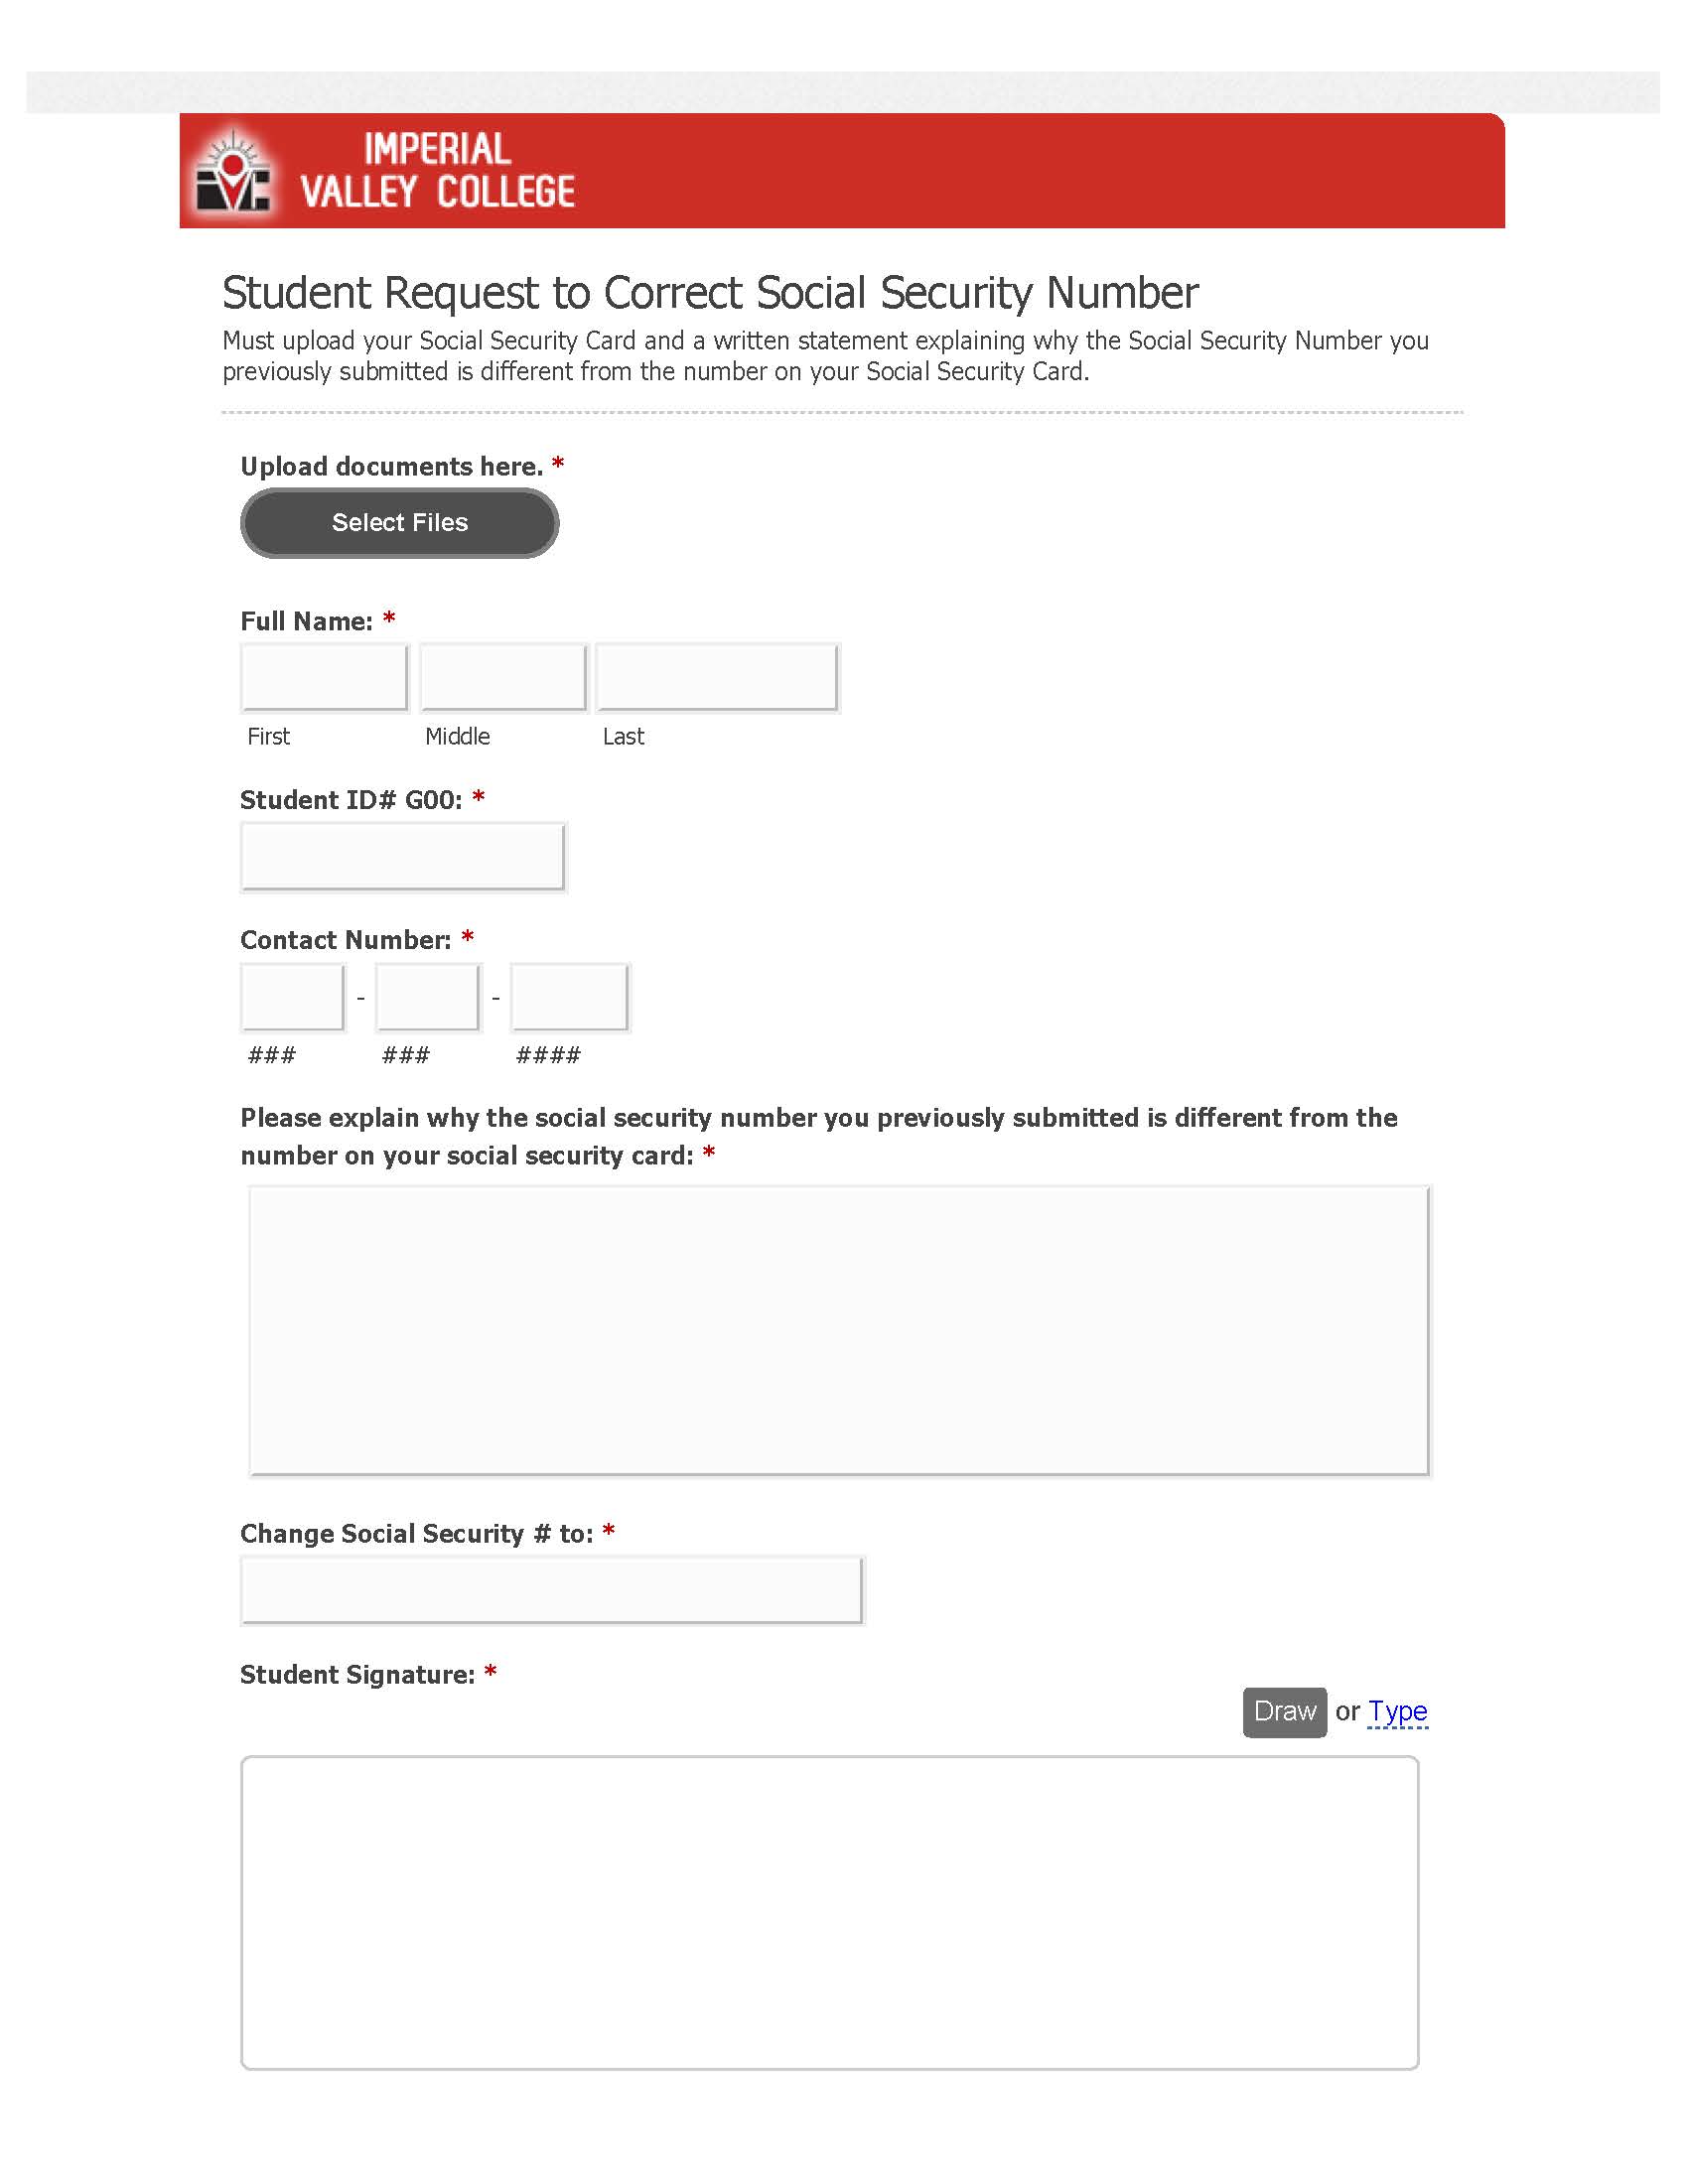 Request to Correct Social Security Number